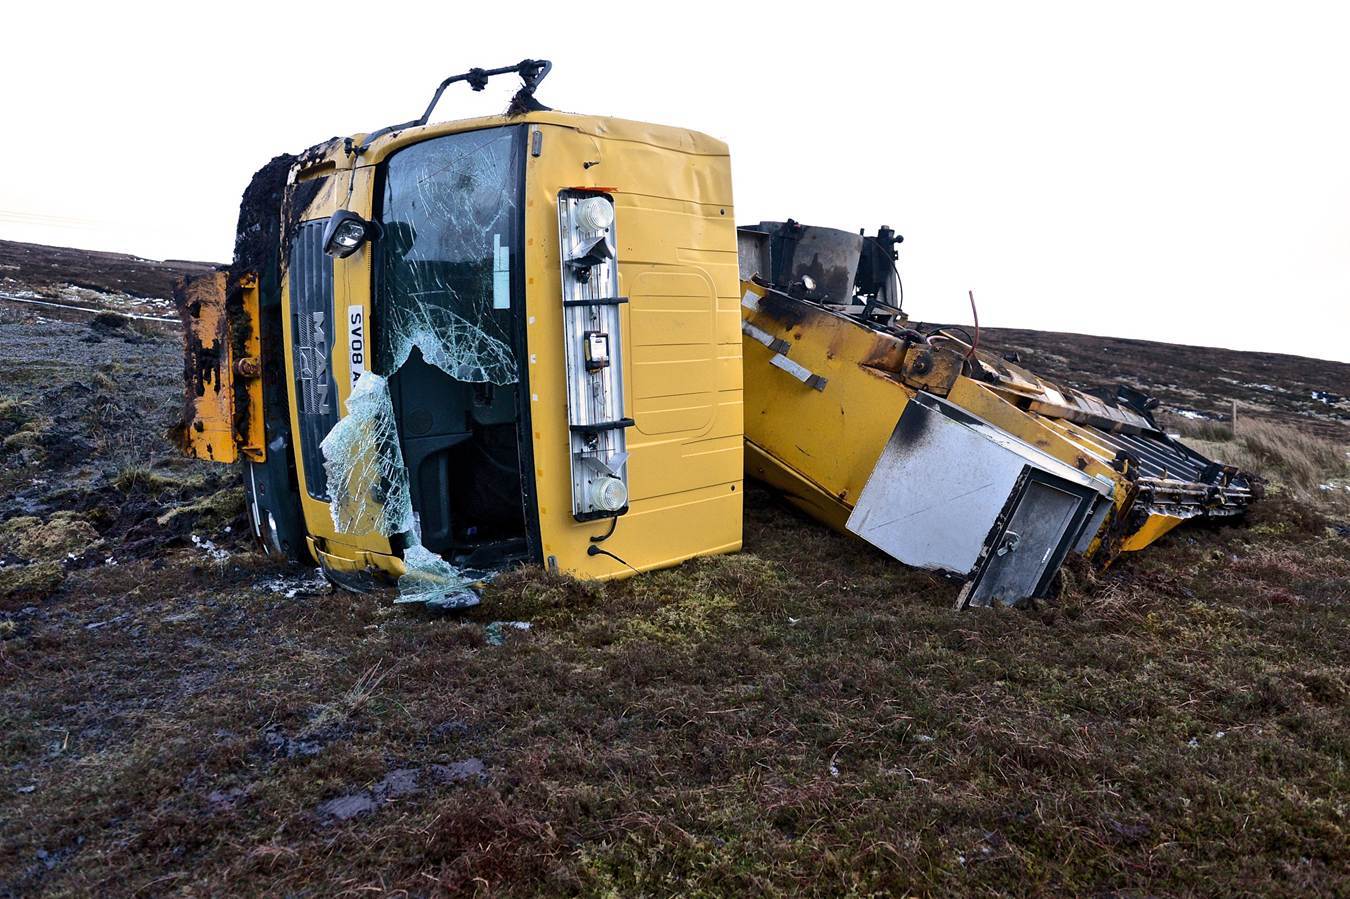 The overturned gritter lying beside the road